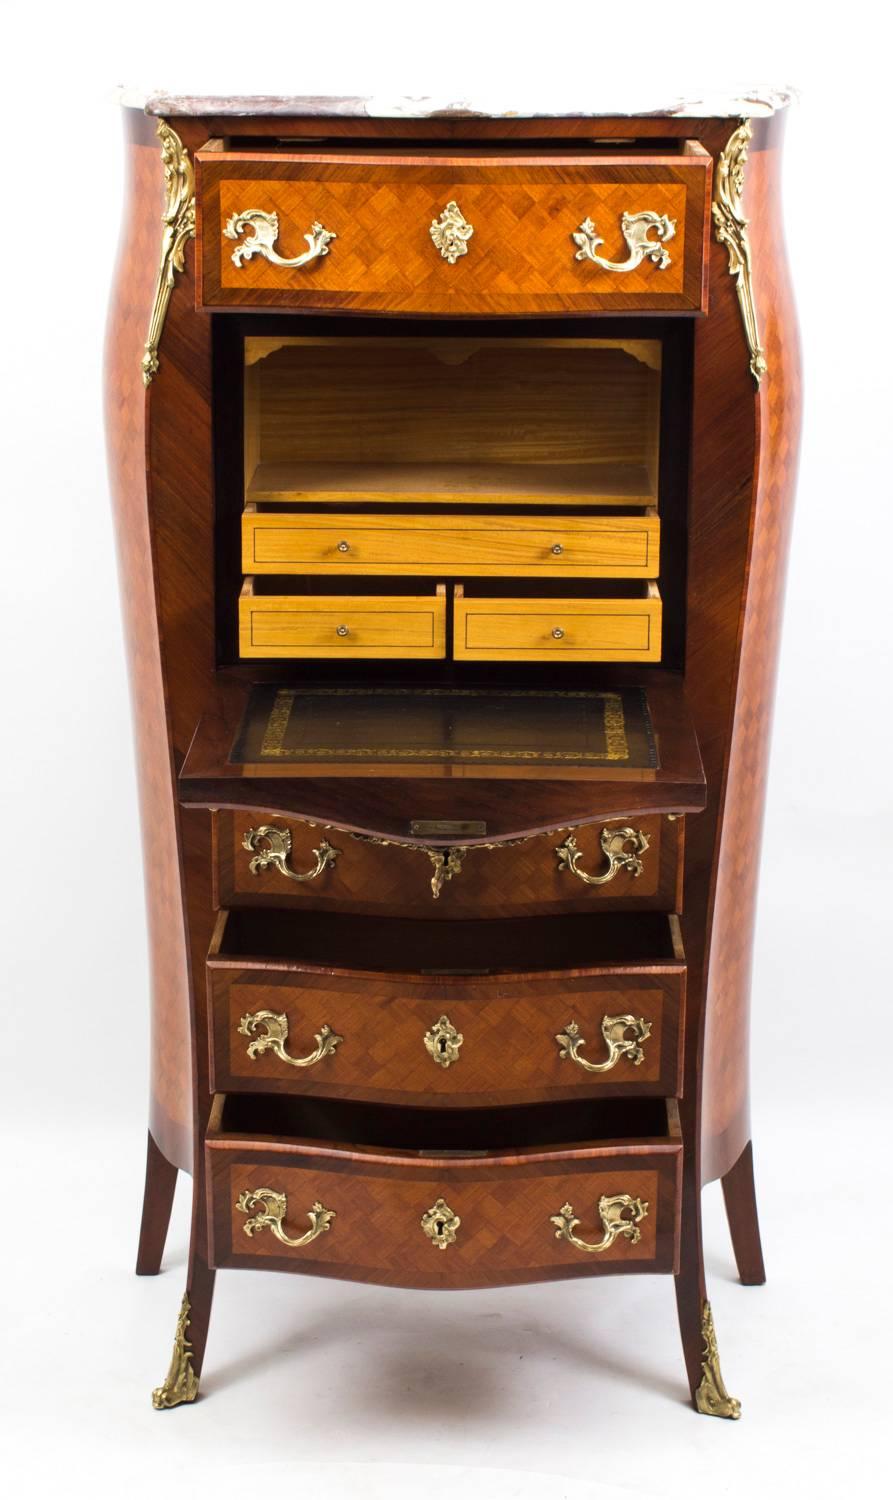 This is an antique French Vernis Martin gonzalo alves and kingwood bombe shaped secretaire cabinet dating from around 1880.

The fall front of this antique secretaire is decorated with a vignette of a courting couple set within an extravagant ormolu